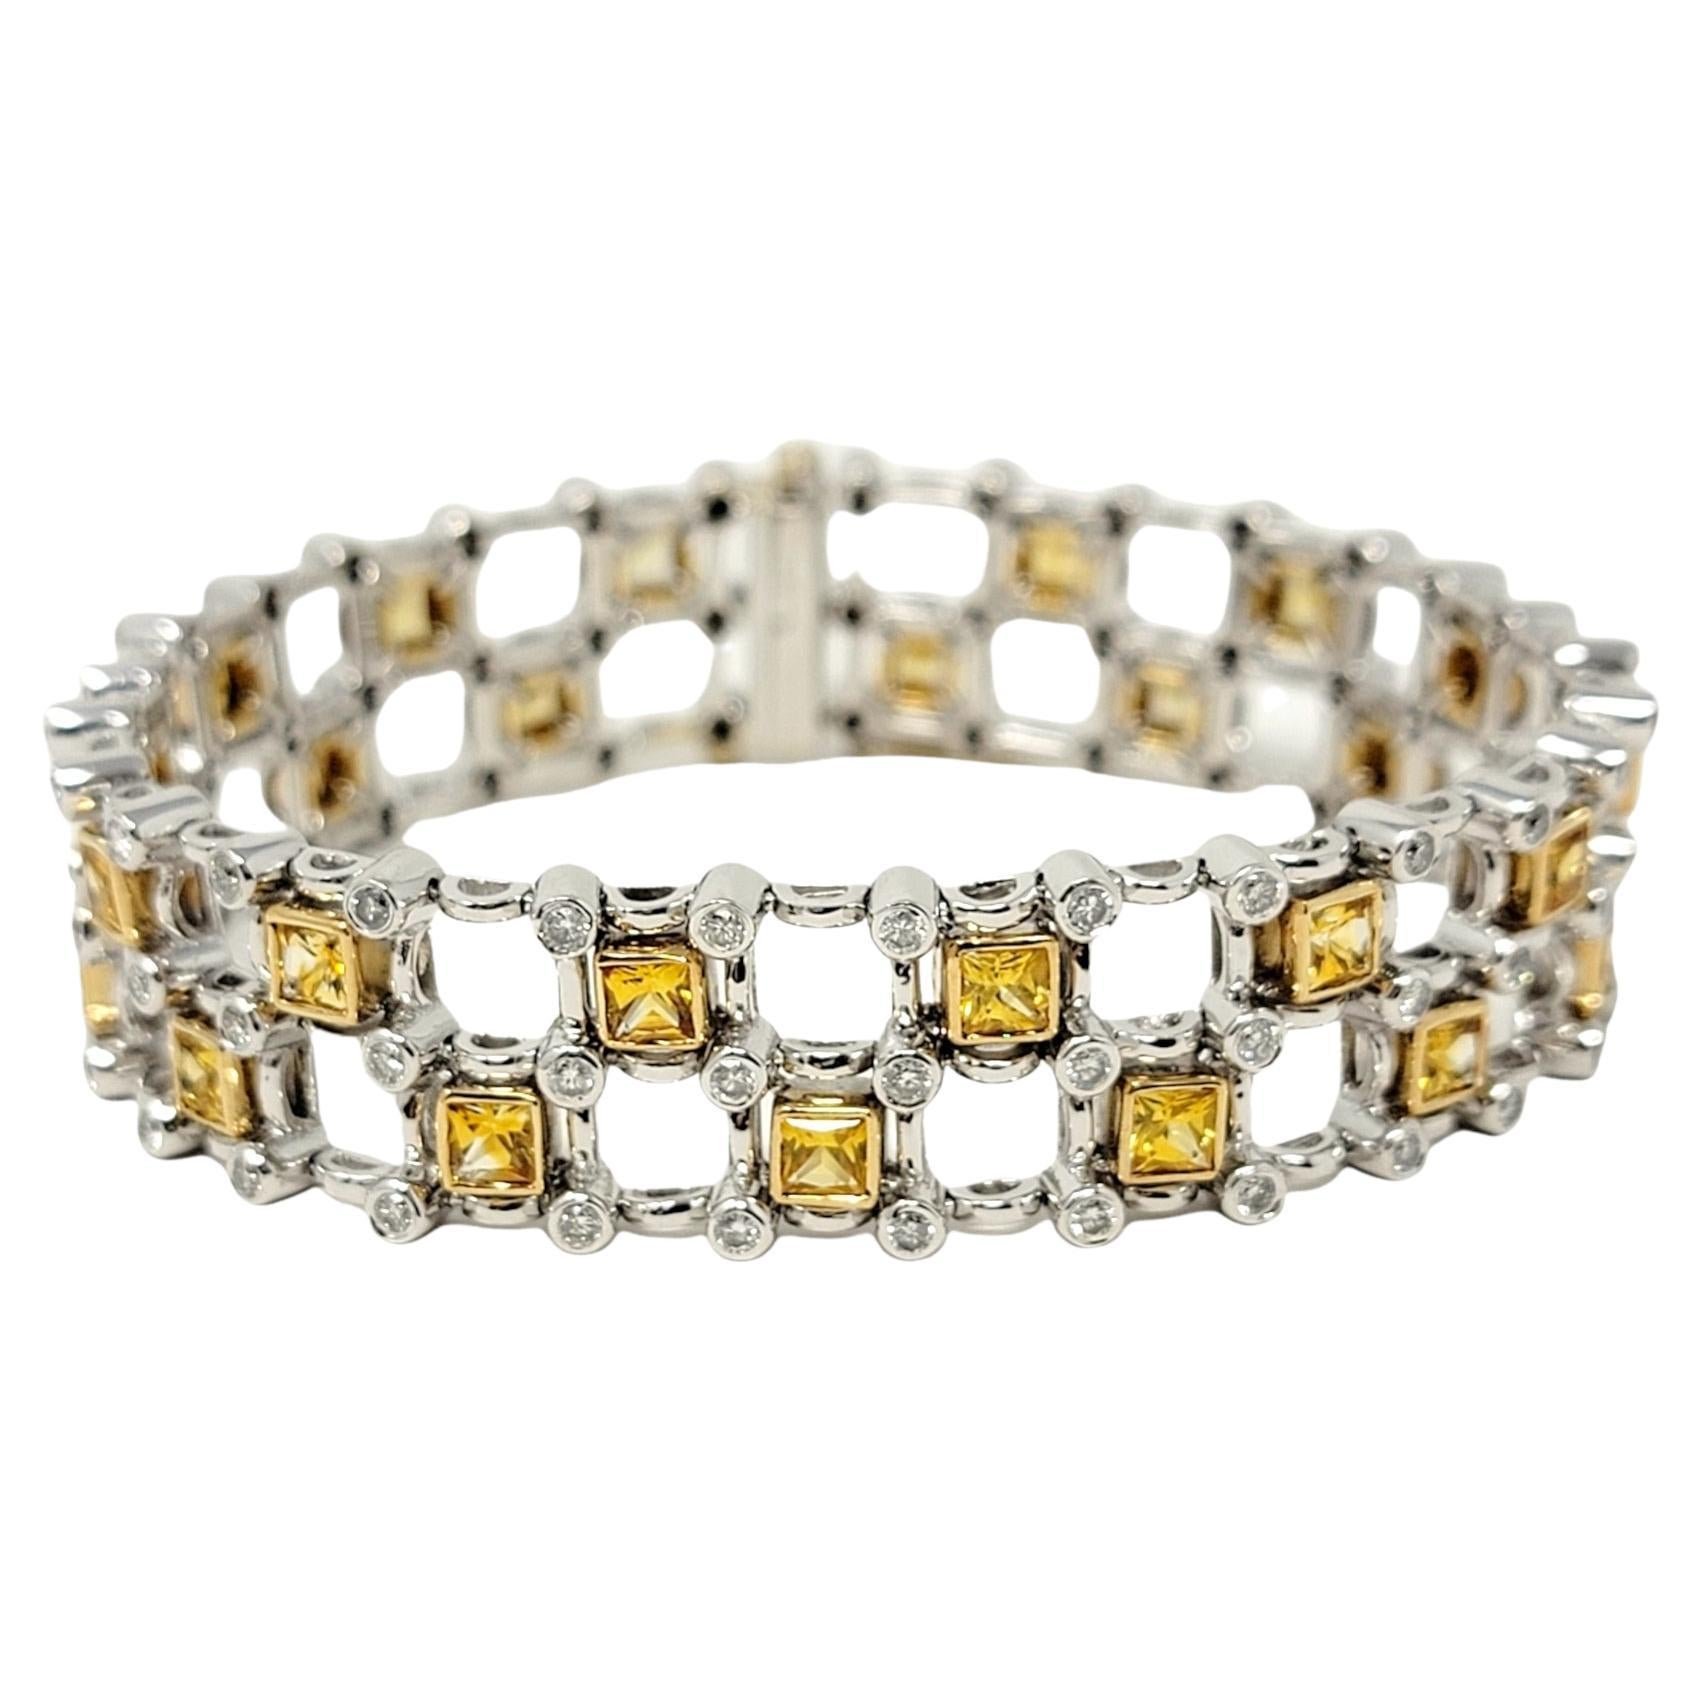 8.60 Carats Square Yellow Sapphire and Round Diamond Two-Tone Gold Link Bracelet